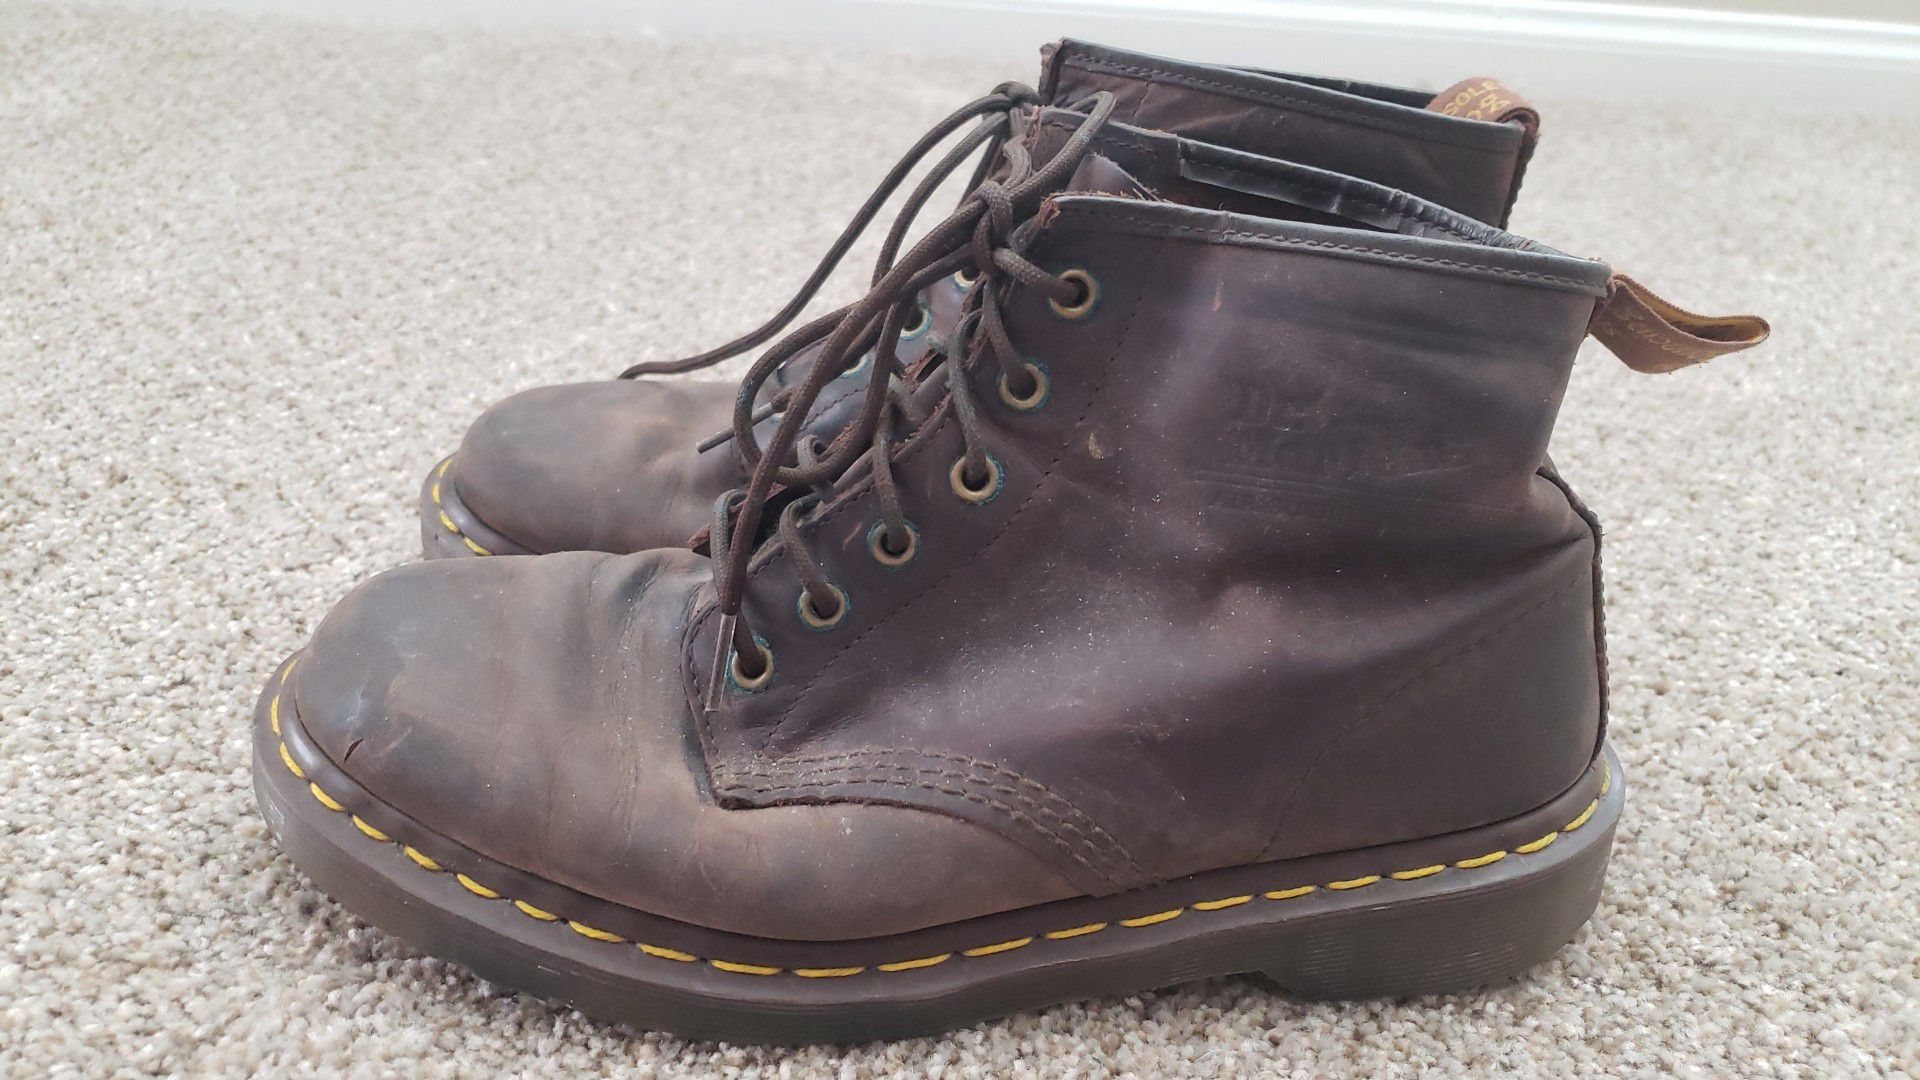 Vintage Mens 90s Doc Martens Brown Leather Boots 9.5 for Sale in ...